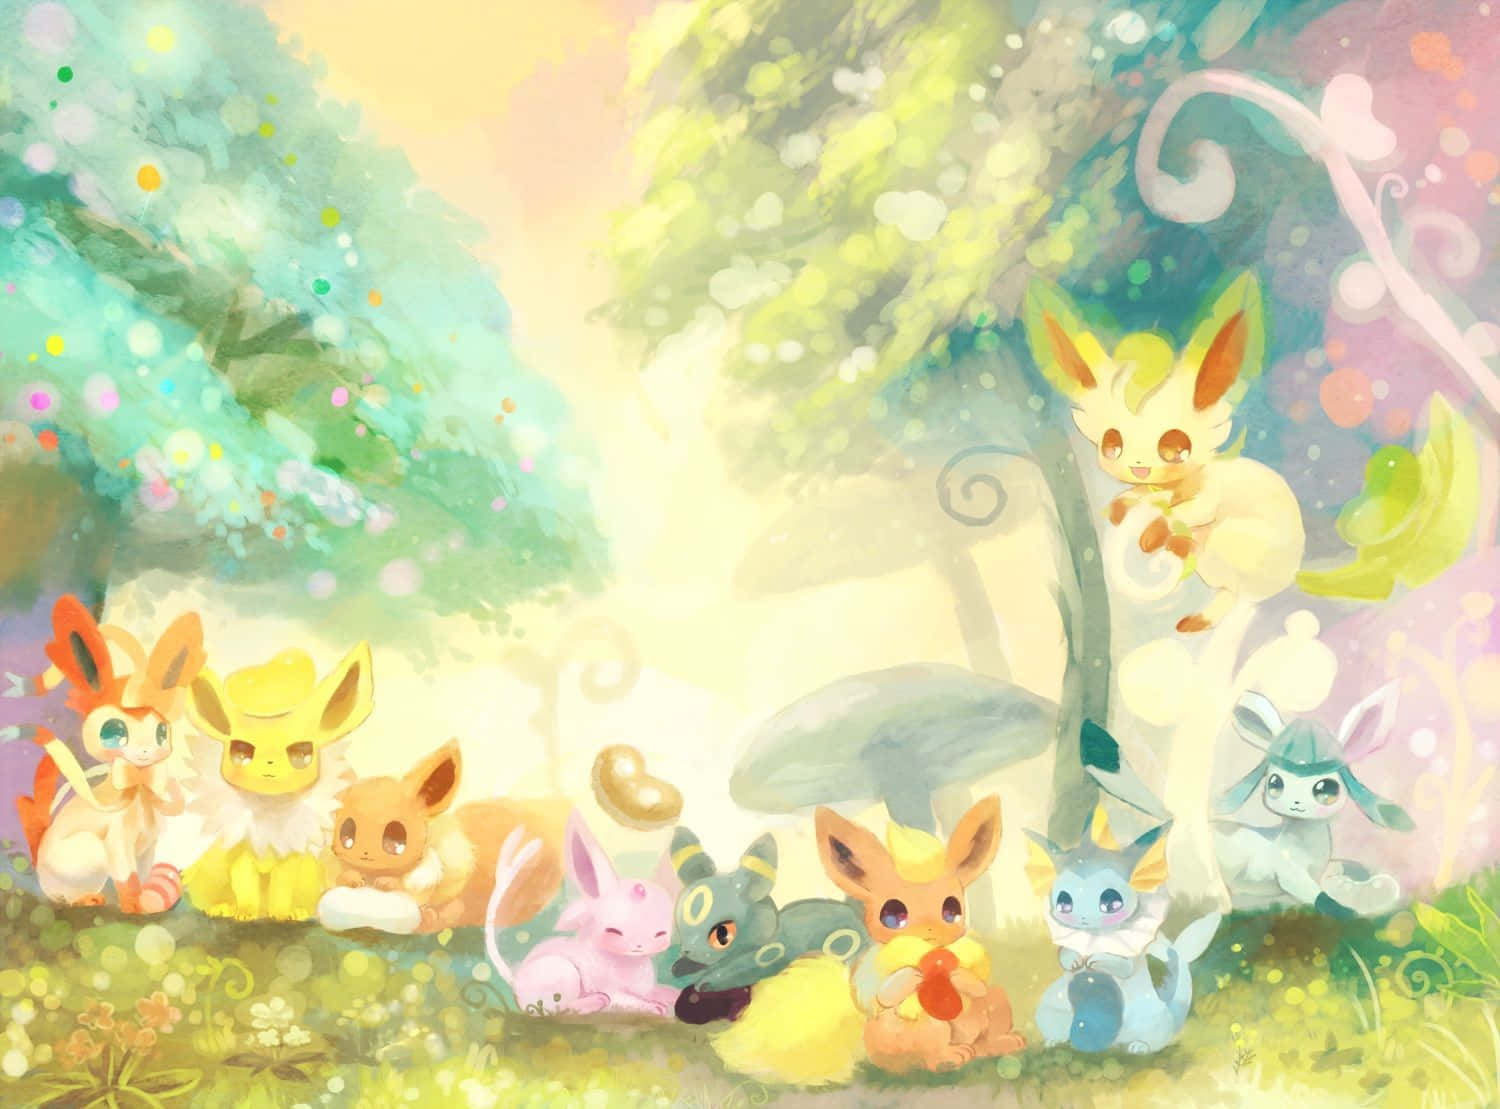 "Cuddle Time with My Baby Eevee" Wallpaper